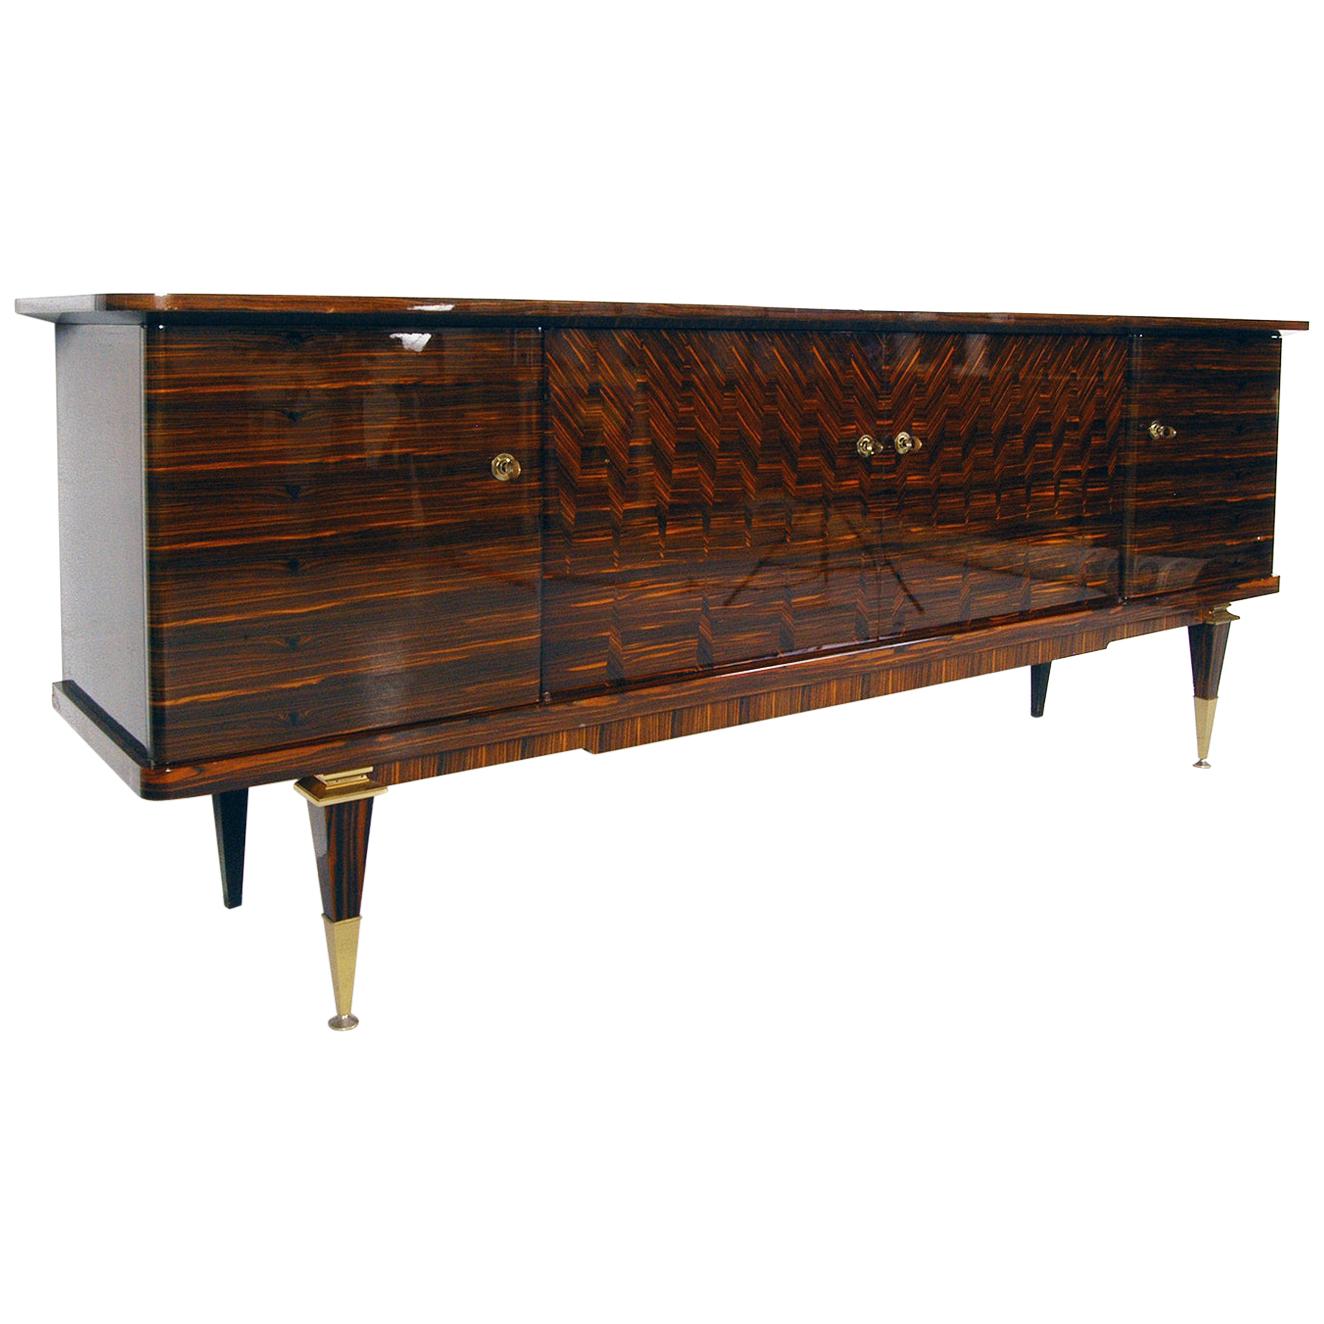  French Lacquered Art Deco Sideboard / Credenza in Macassar Ebony and Maple